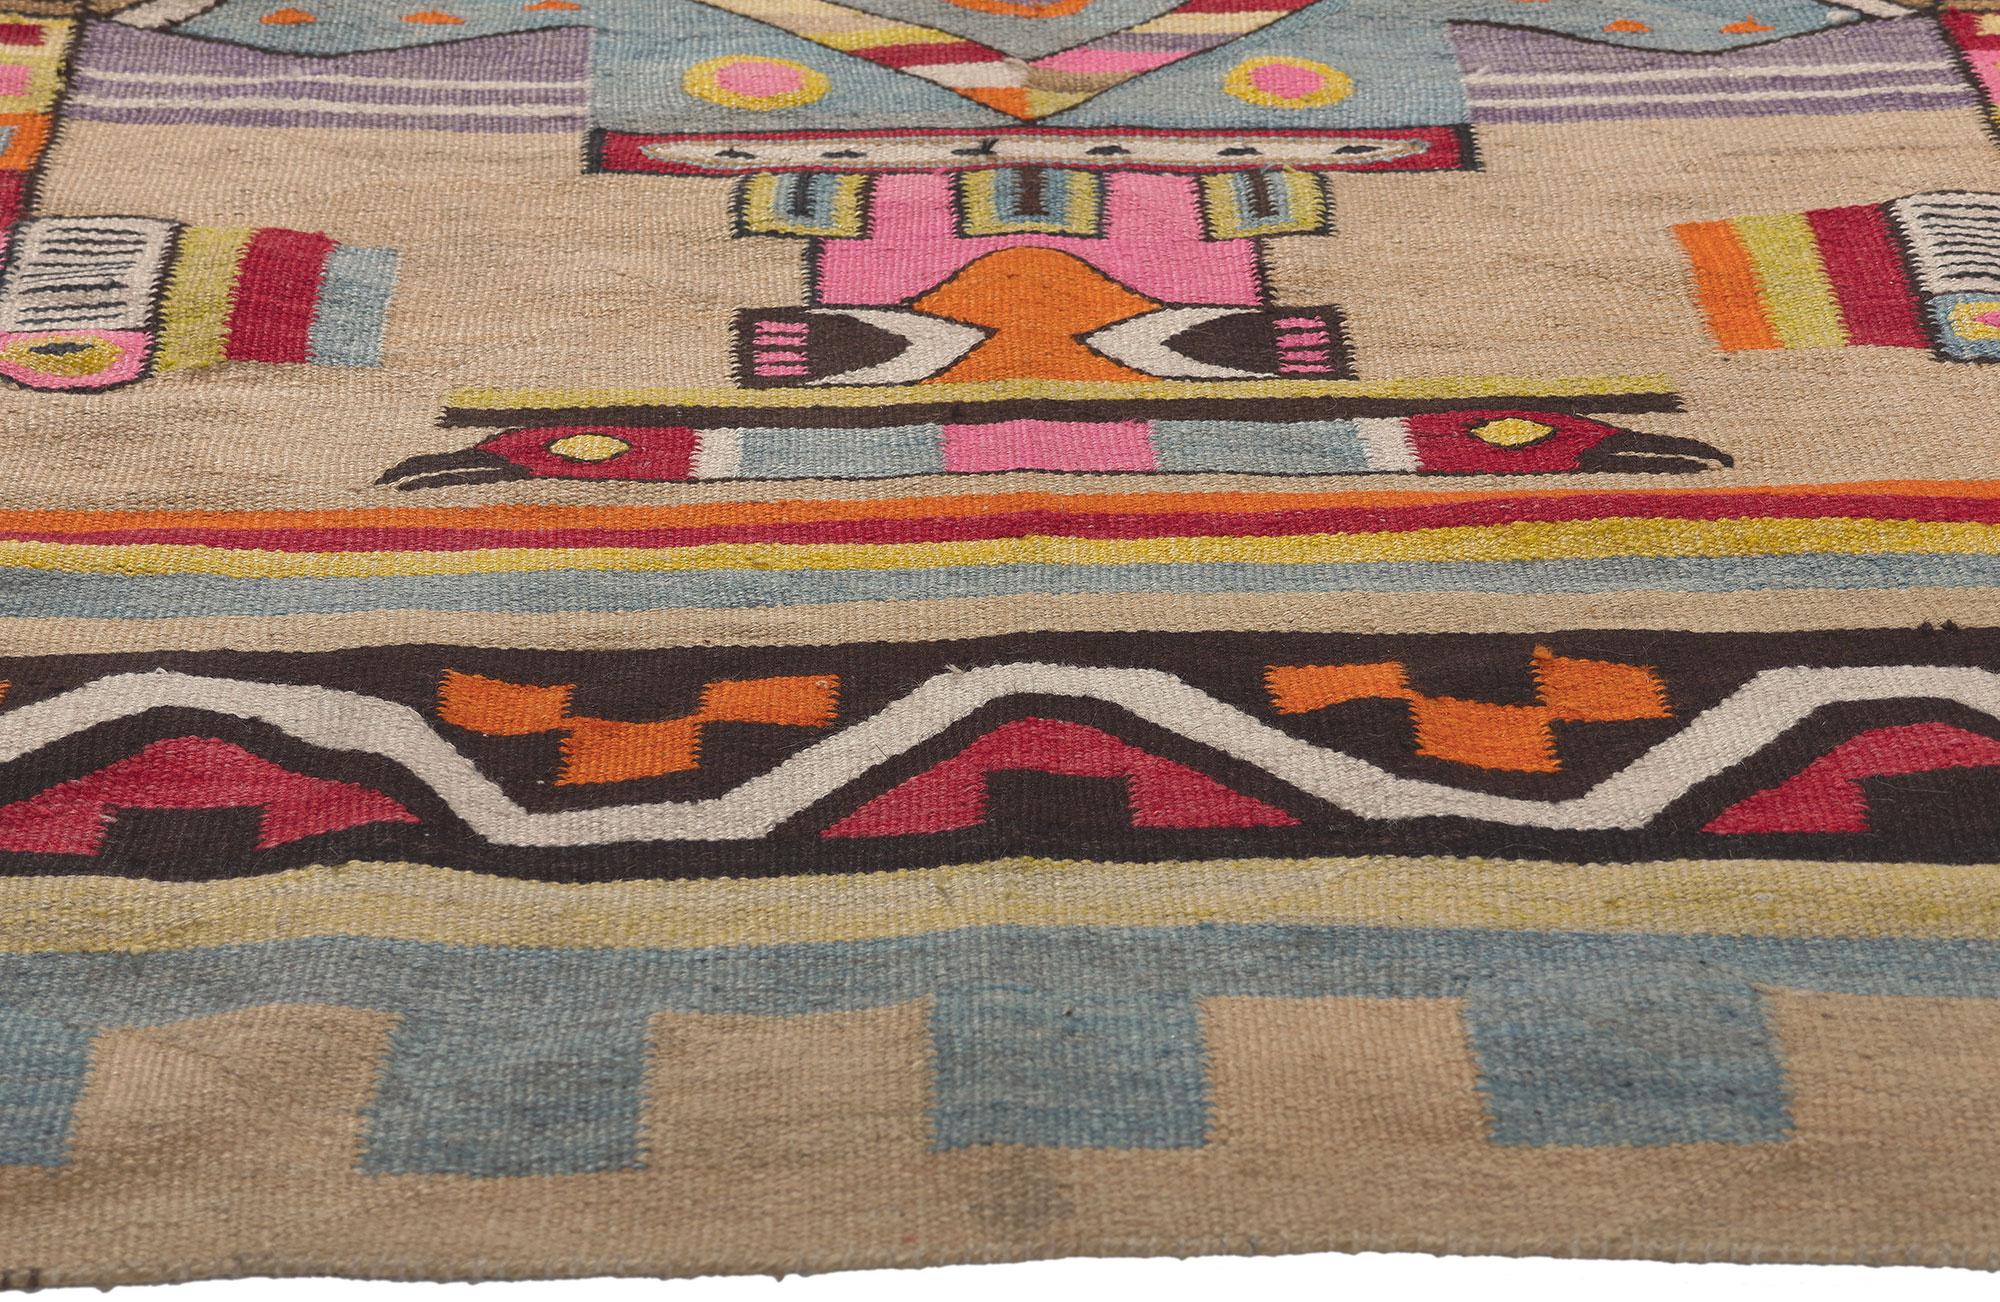 Peruvian Colorful Vintage South American Kilim Rug with Pre-Incan Viracocha Deity  For Sale